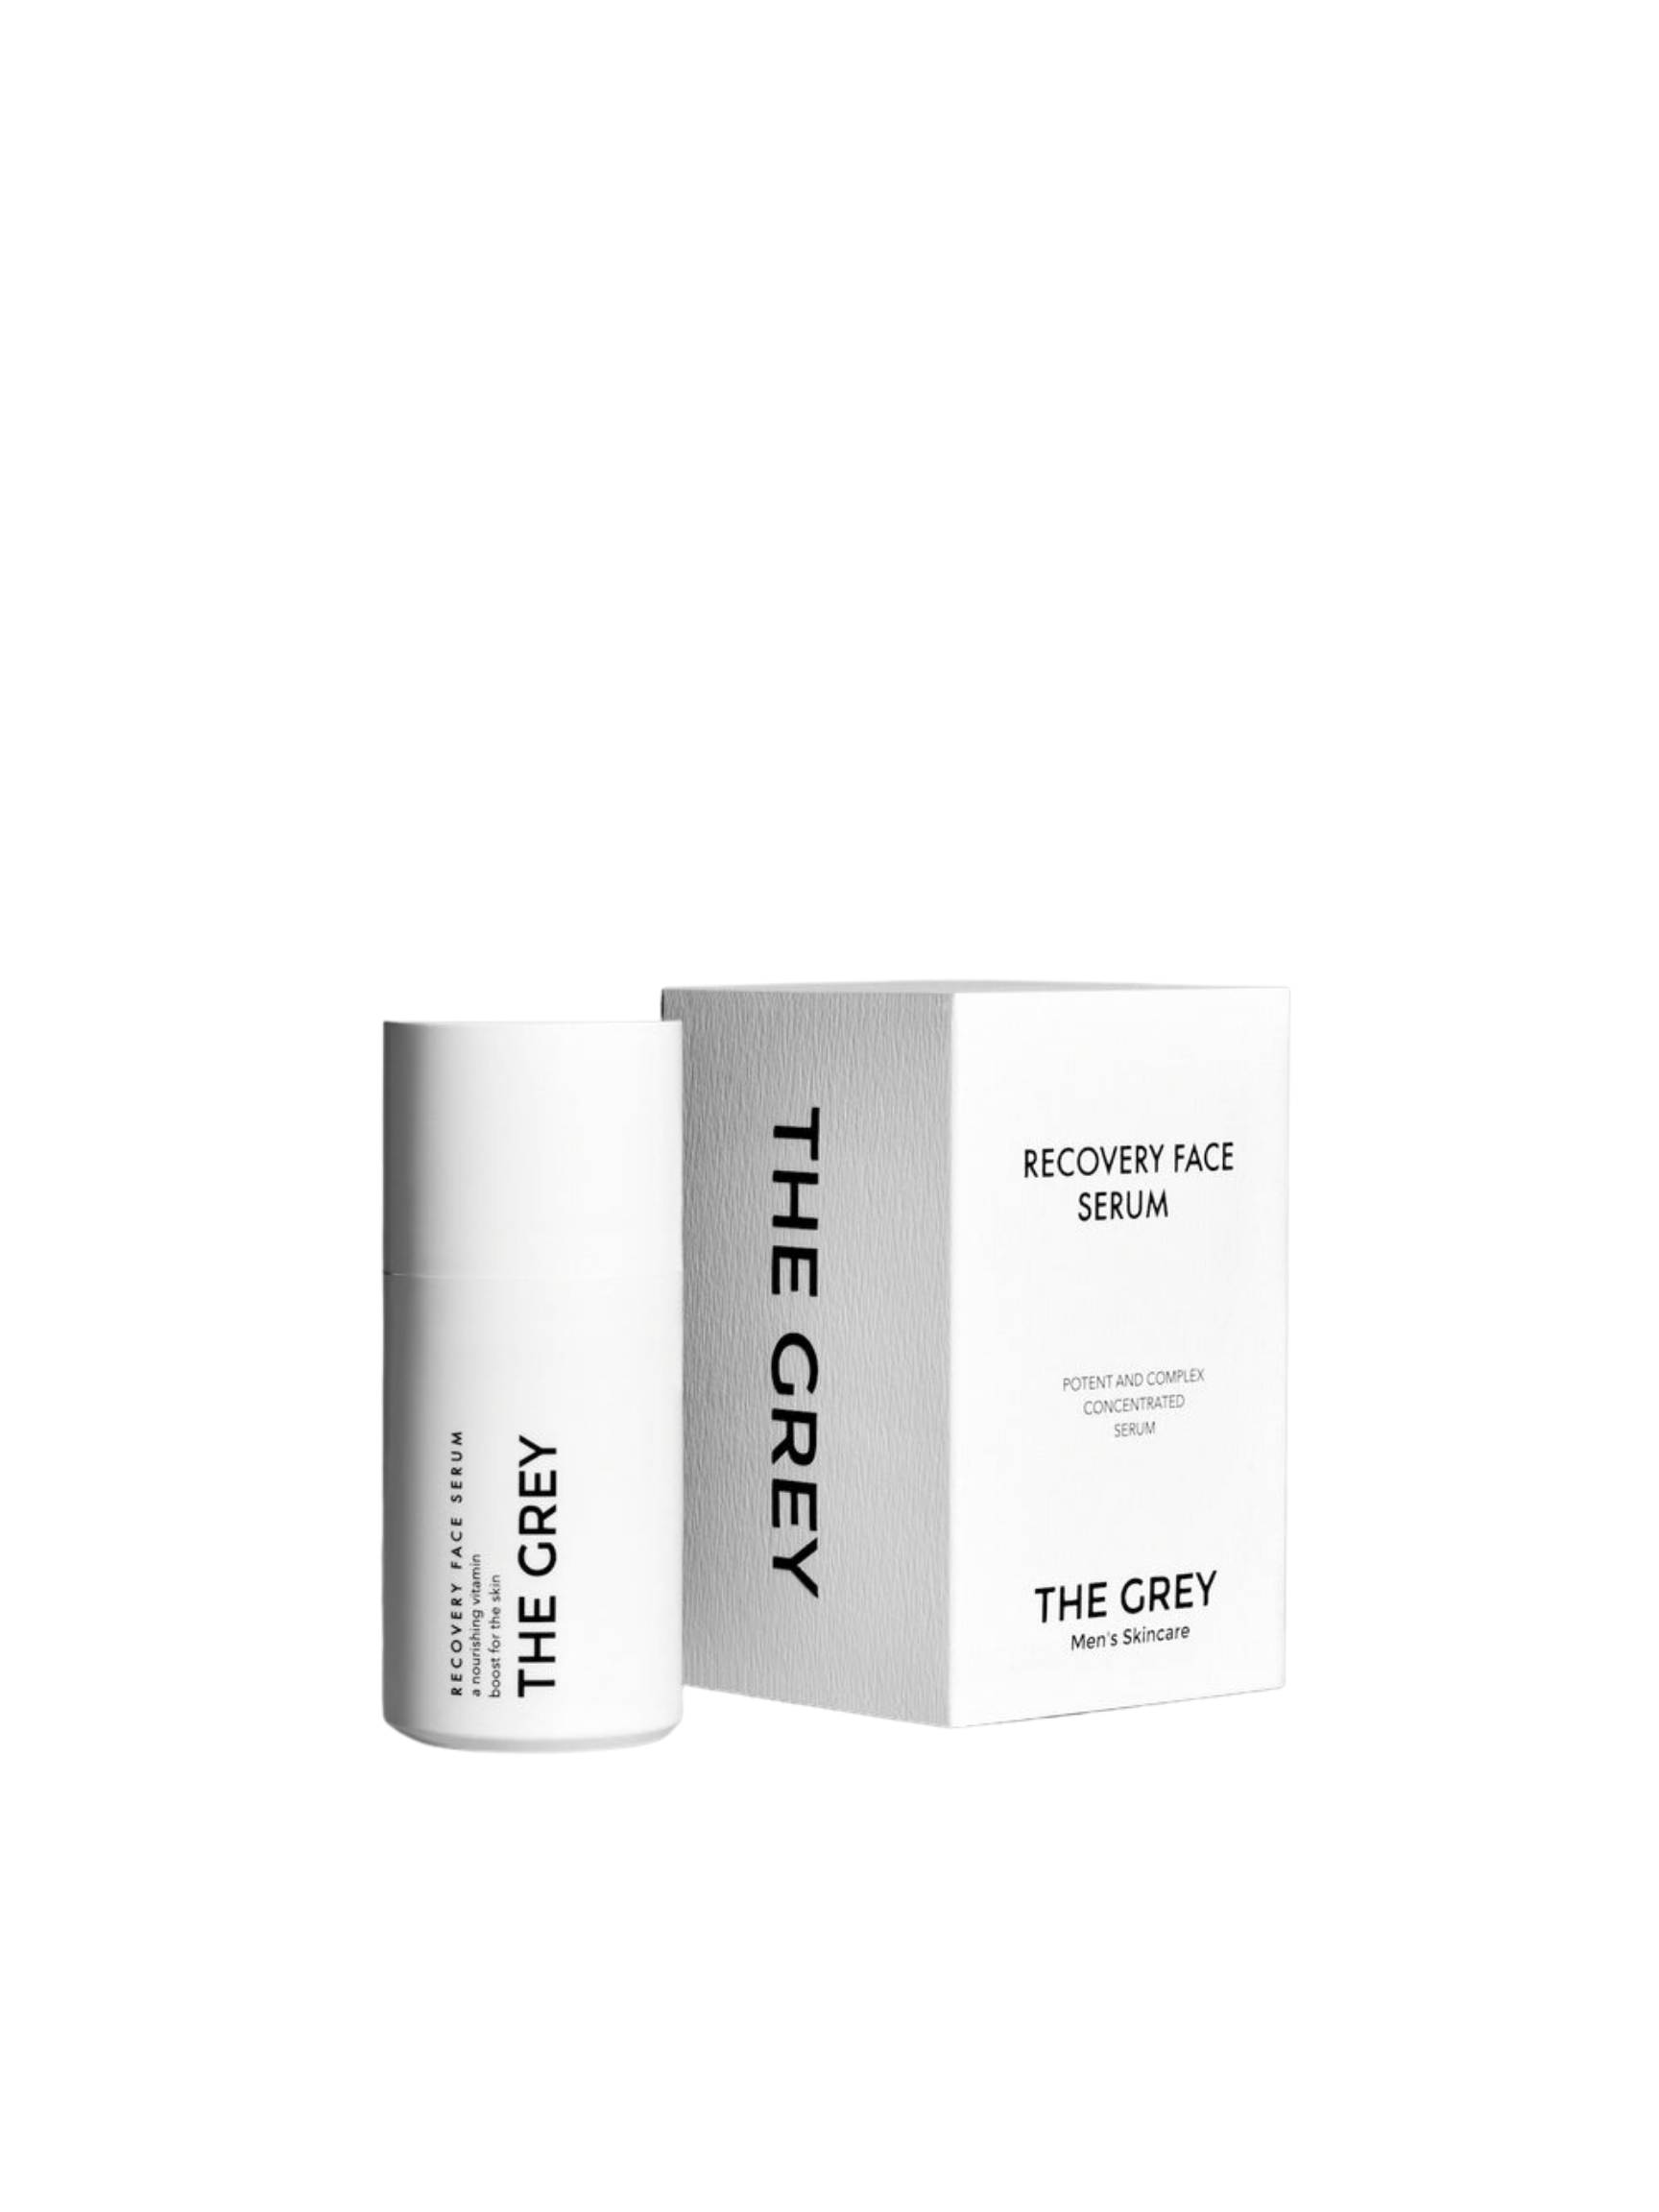 The Grey Skincare Recovery Face Serum 30mL, Recovery Face Serum, facial serum, The Grey Skincare, PourHommies